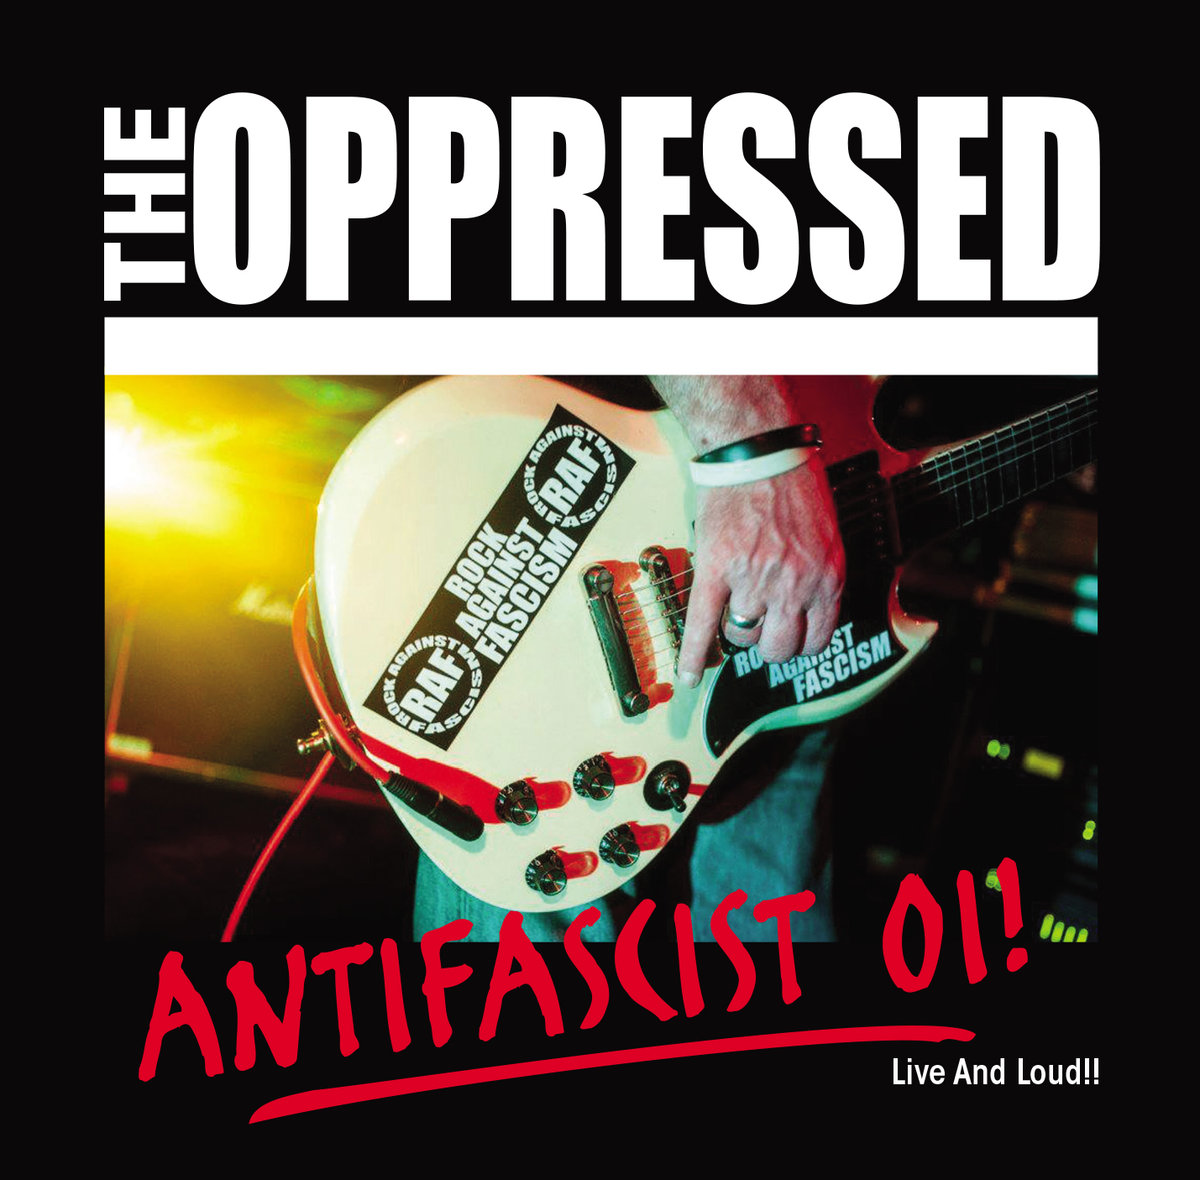 THE OPPRESSED "Live and loud !" - CD